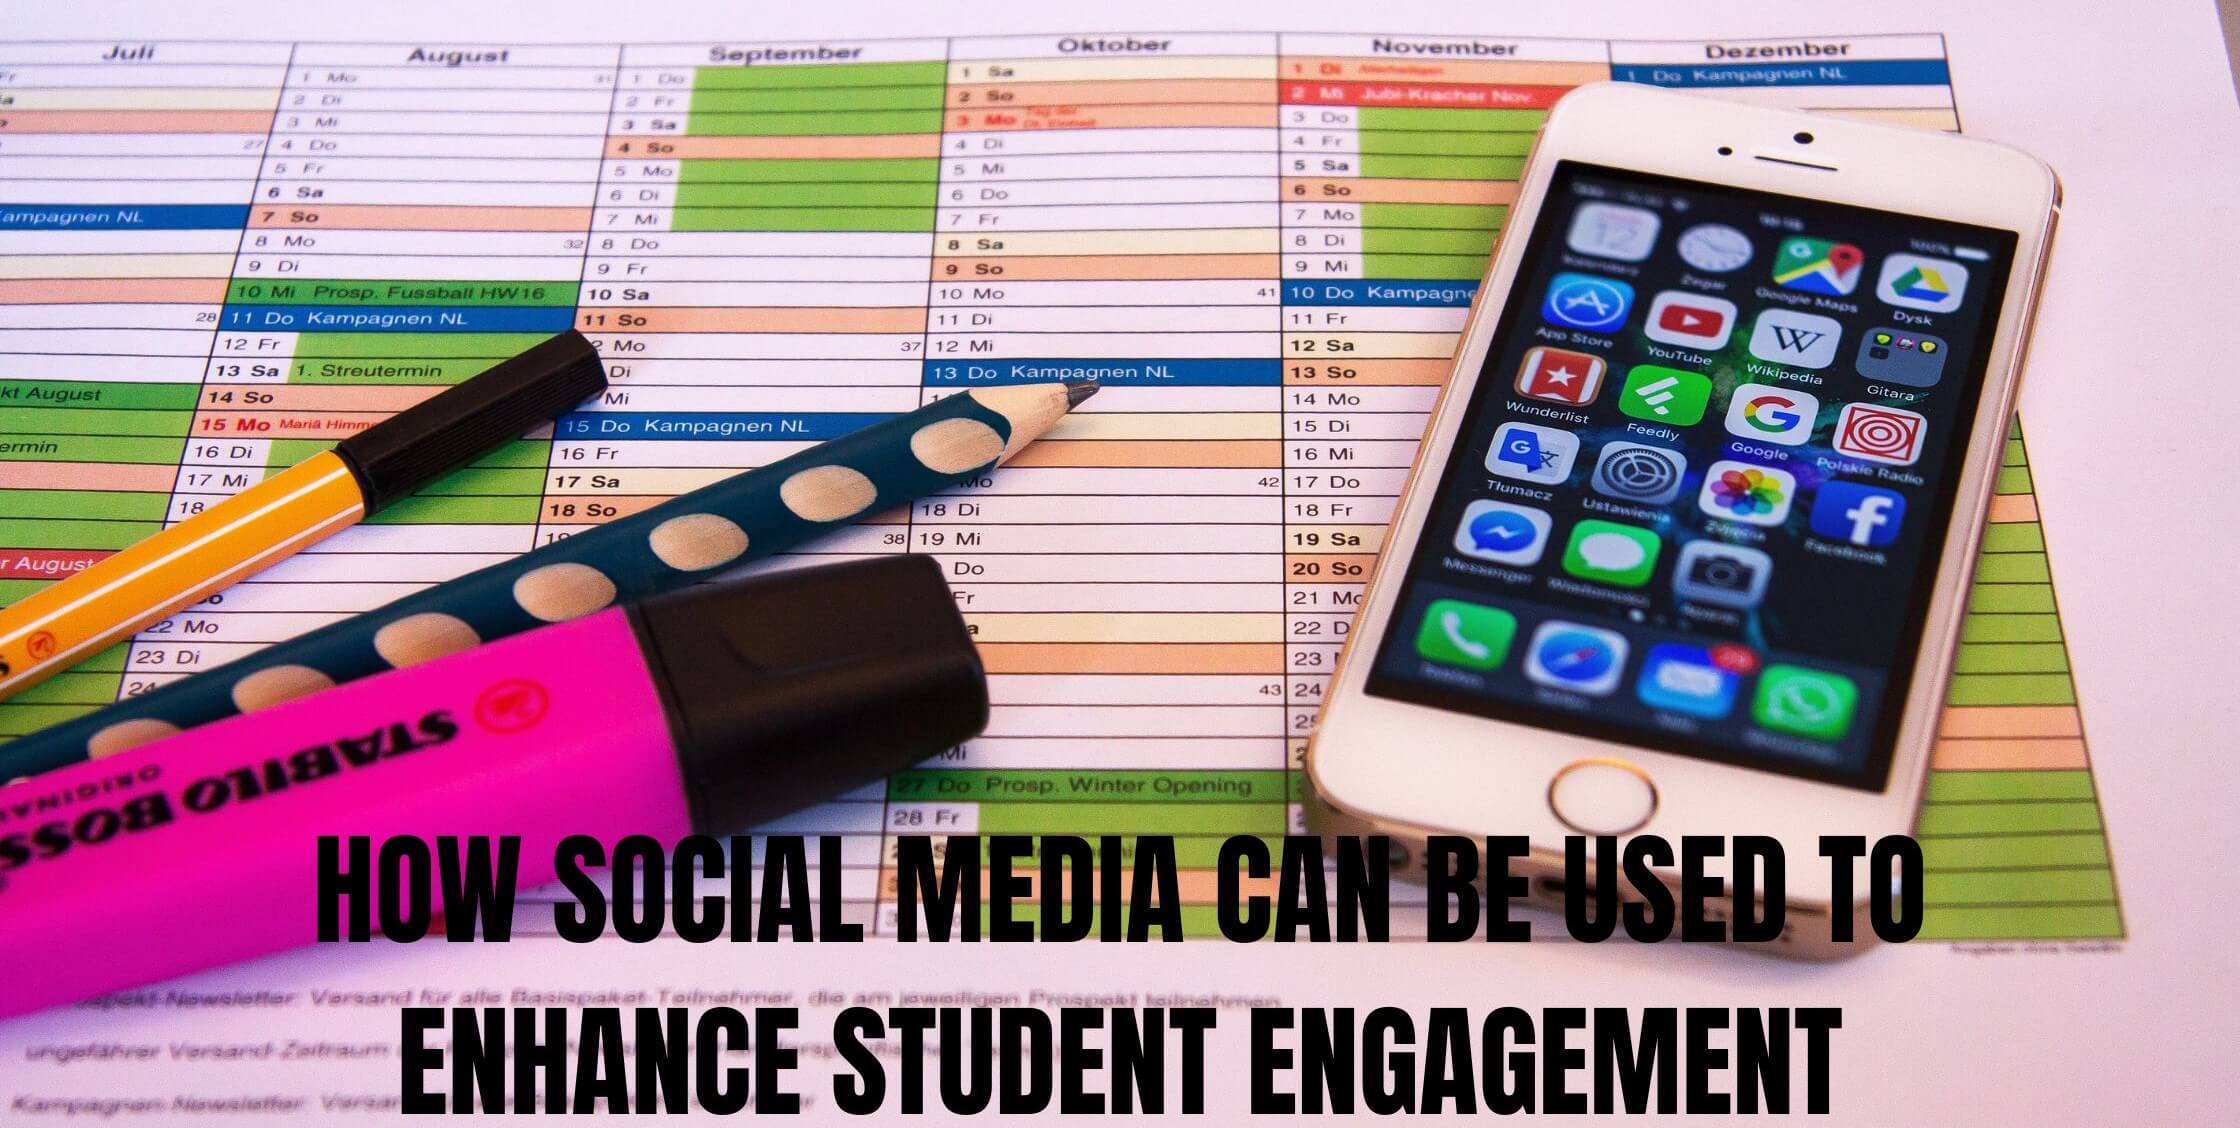 How Social Media Can Be Used to Enhance Student Engagement